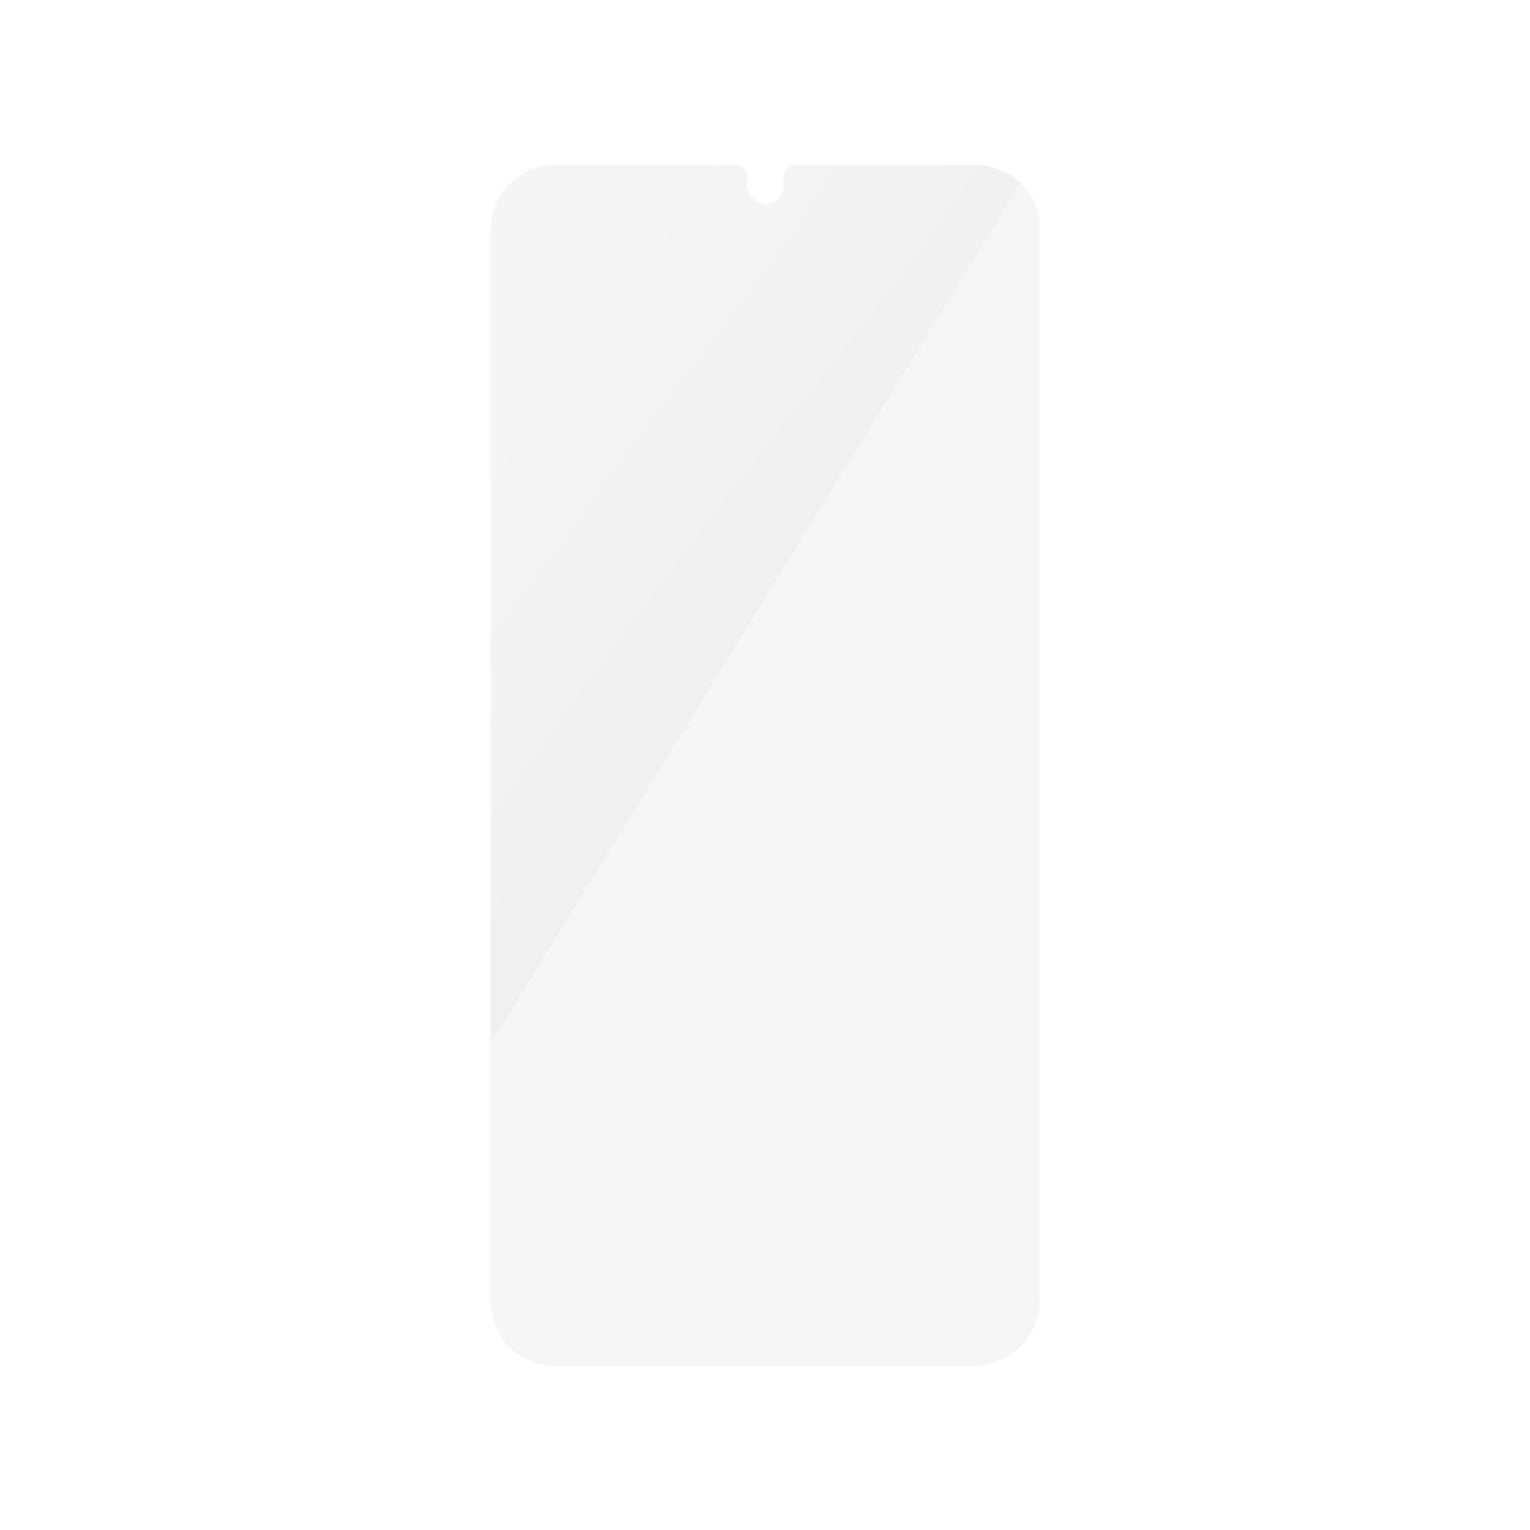 Samsung Galaxy A25 Screen Protector Ultra Wide Fit (with EasyAligner)